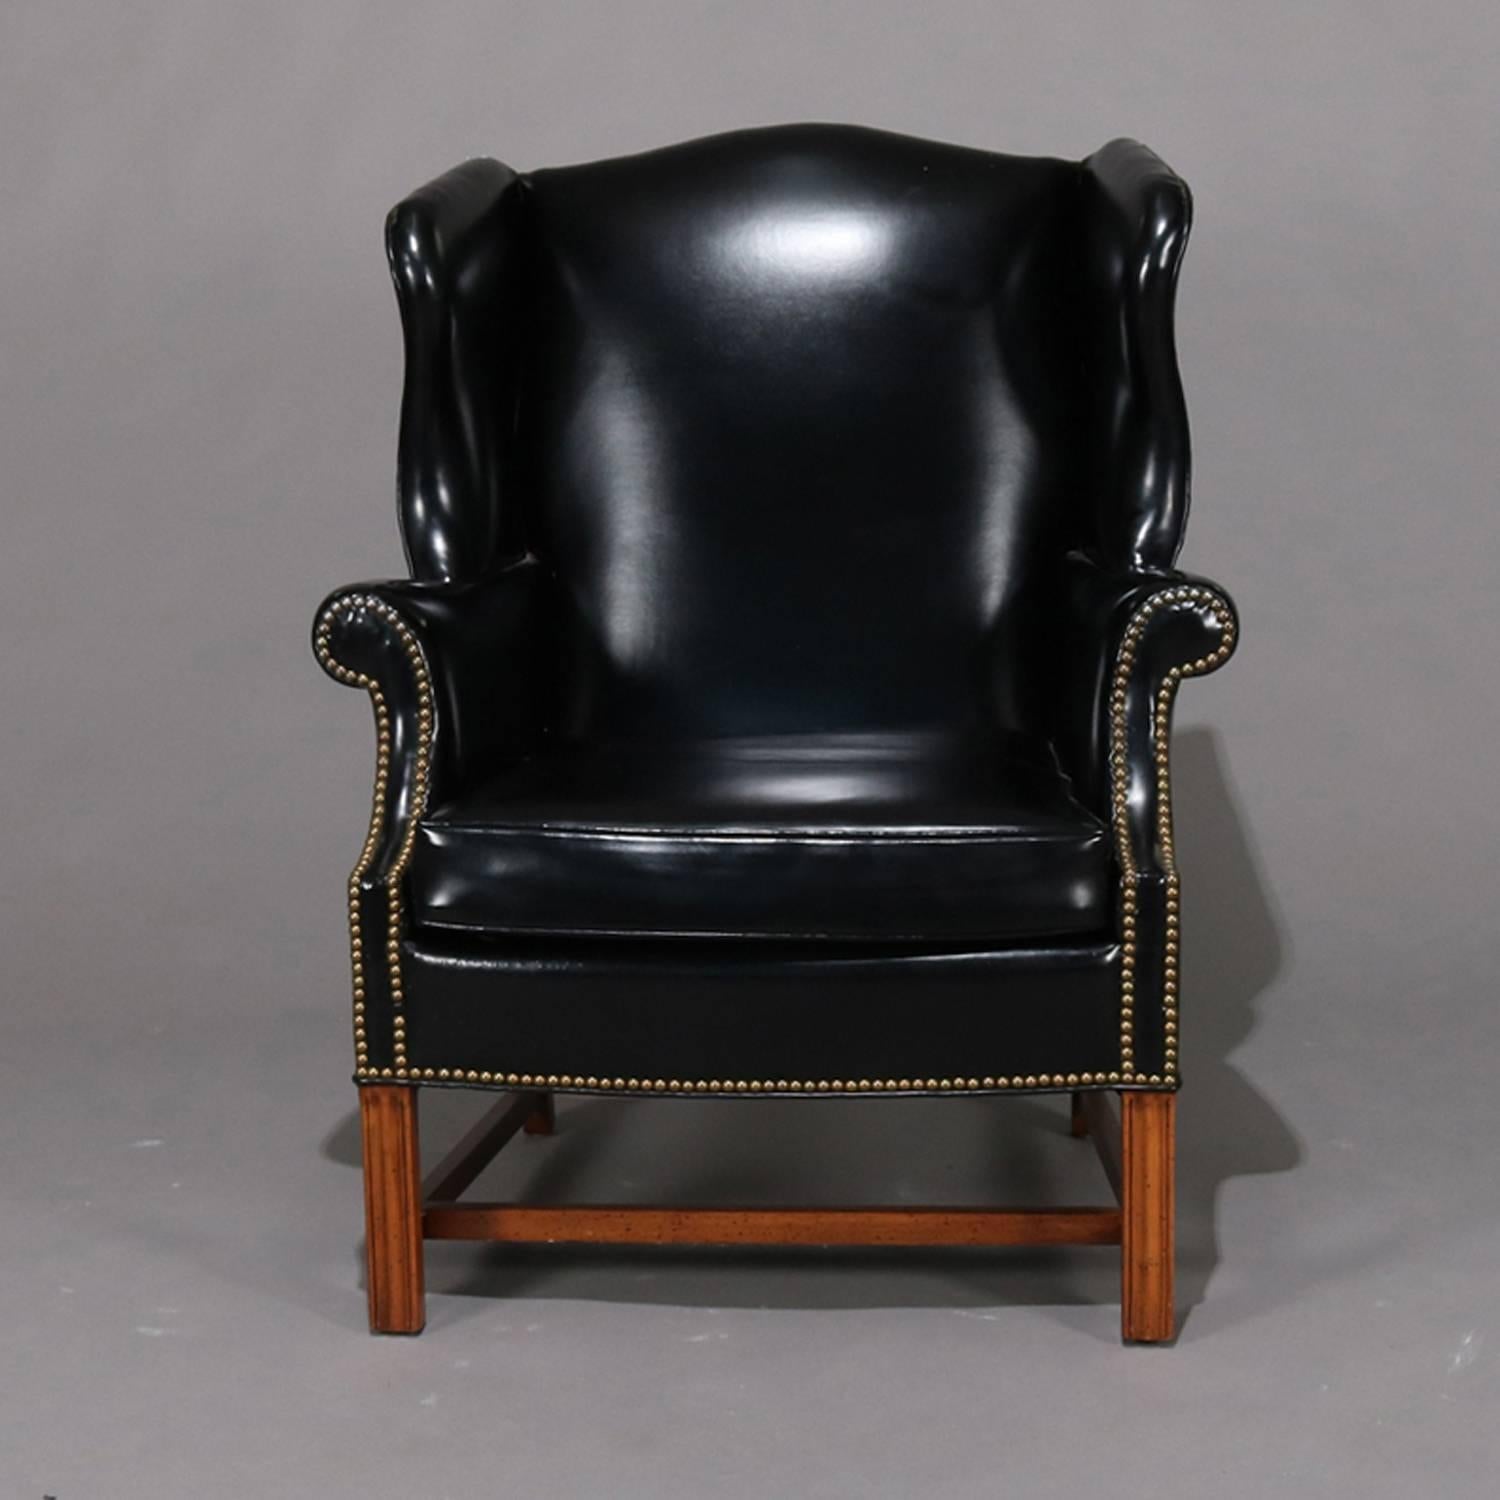 Chippendale style fireside wing back armchair features scalloped wings and scrolled arms with black faux leather upholstery and brass tacks, partial original label, 20th century.

Measures: 40